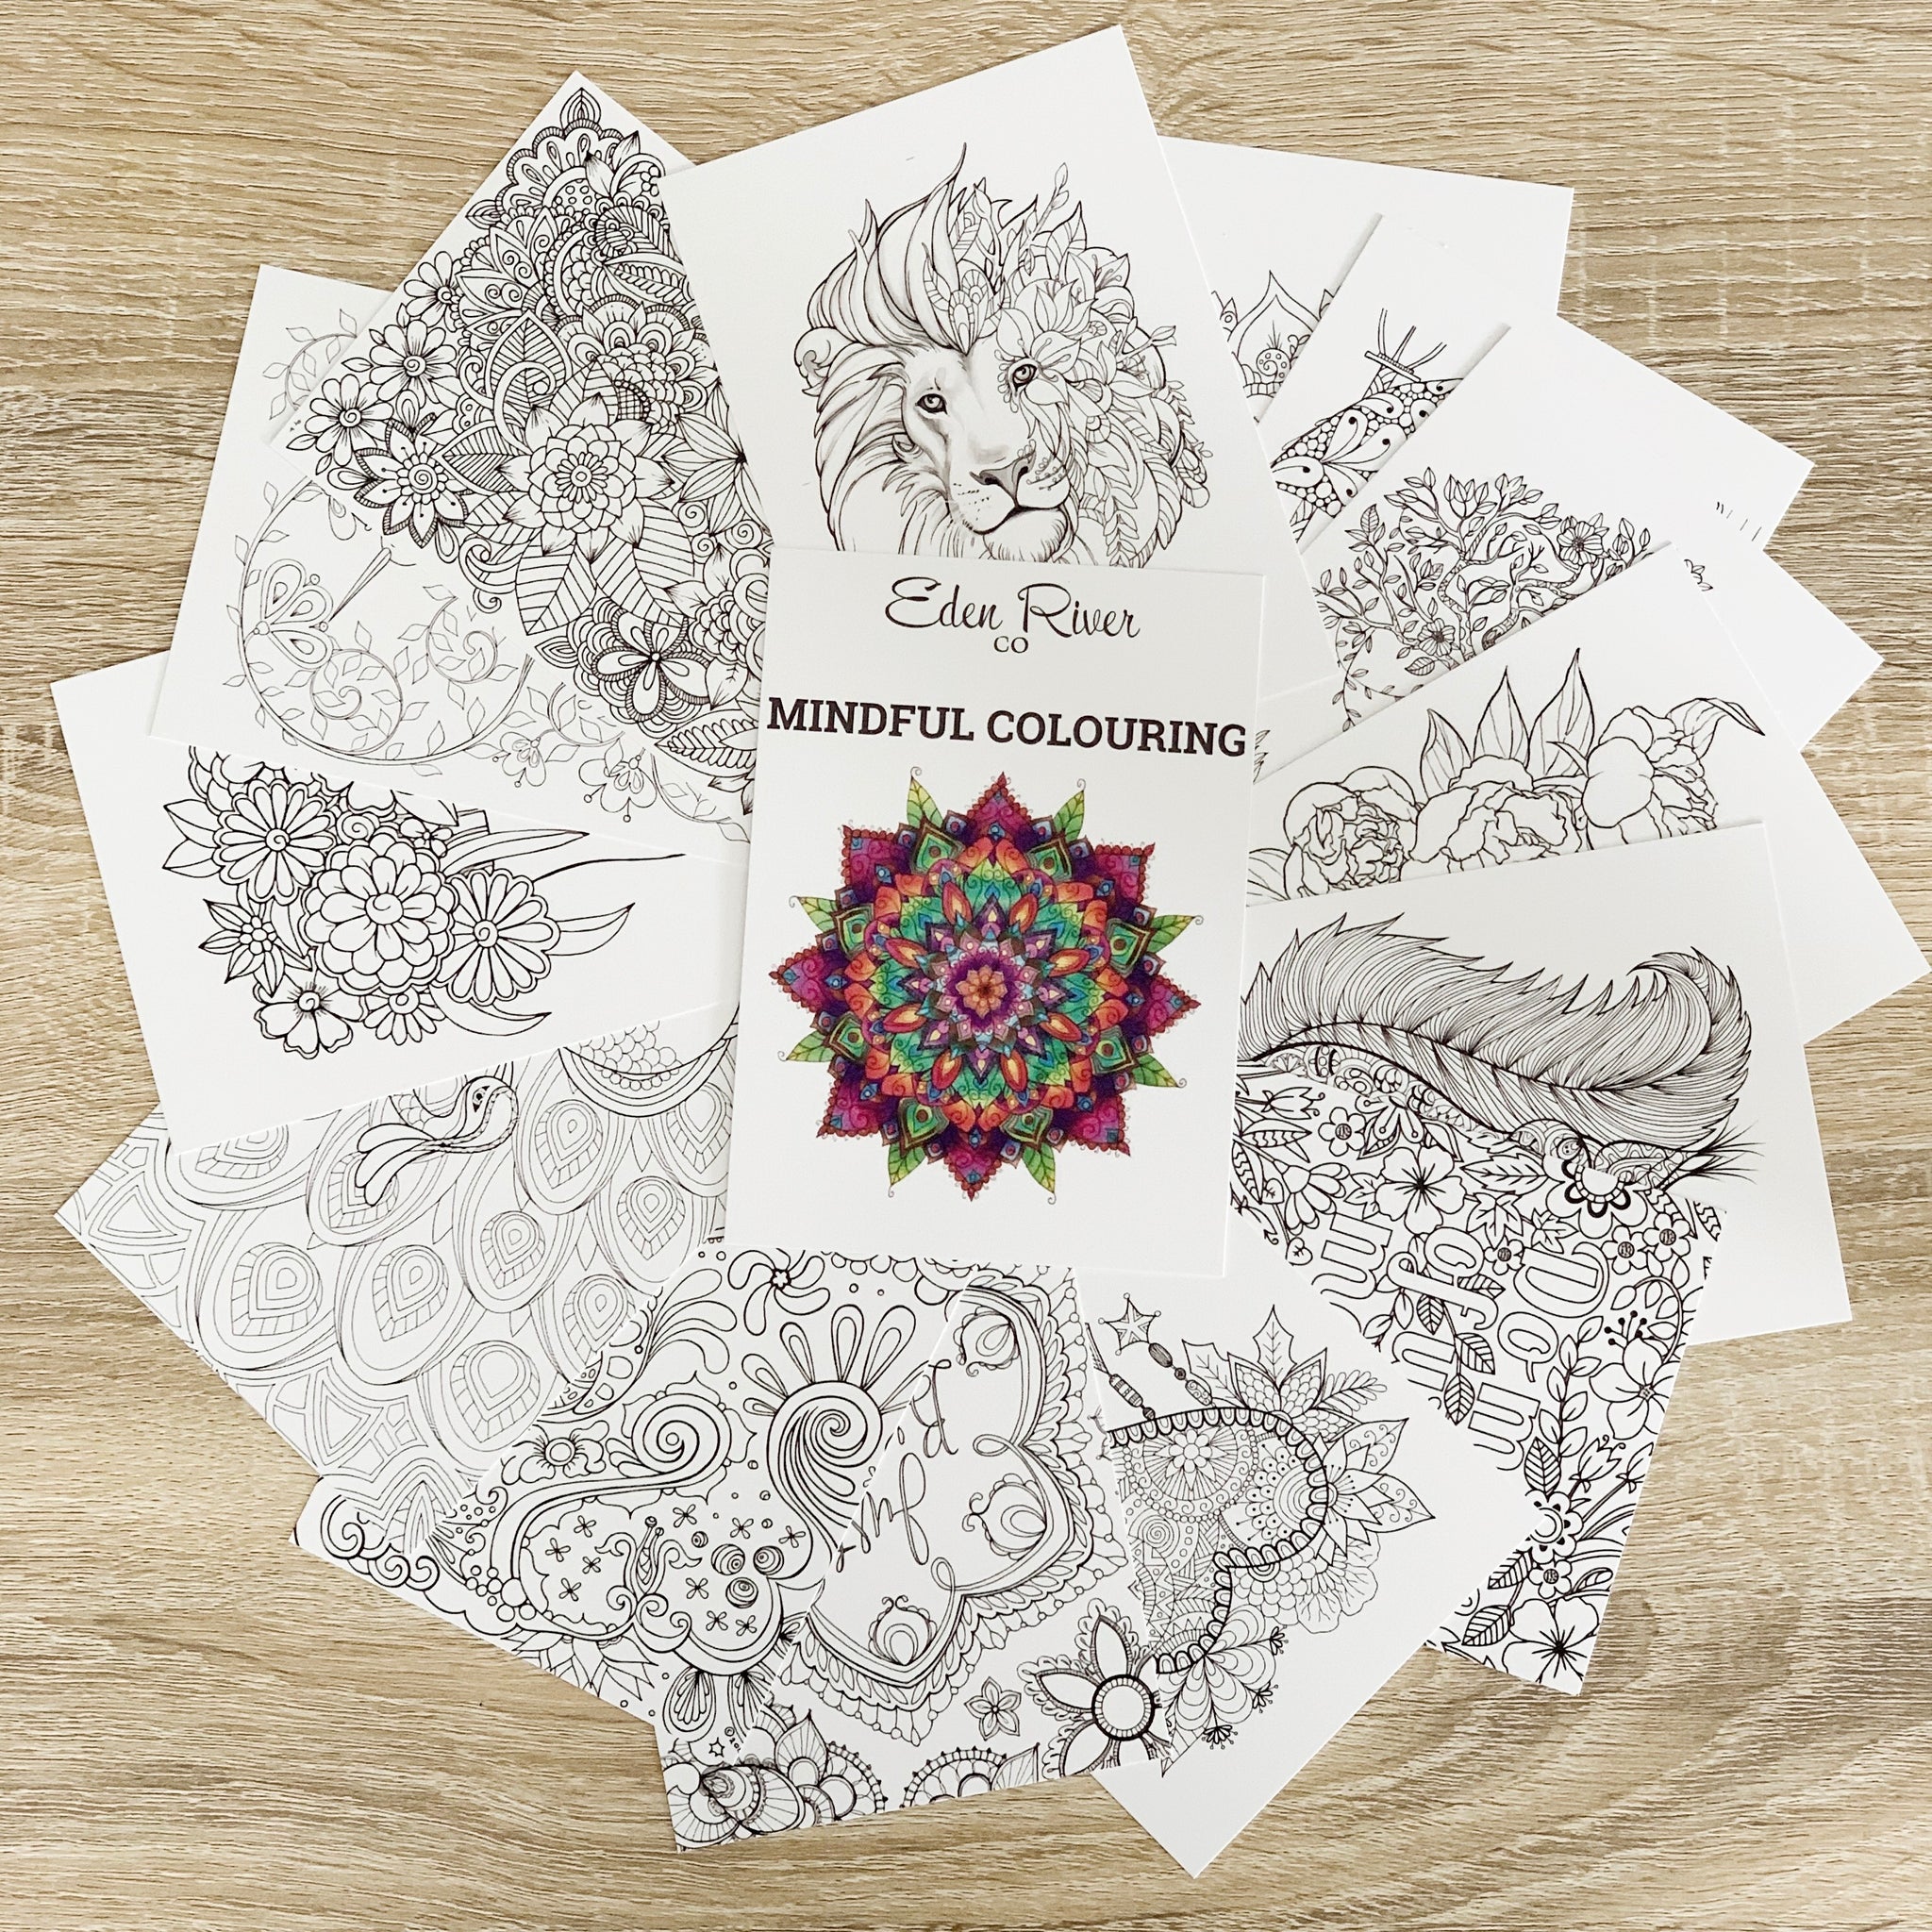 The Mindfulness Coloring series